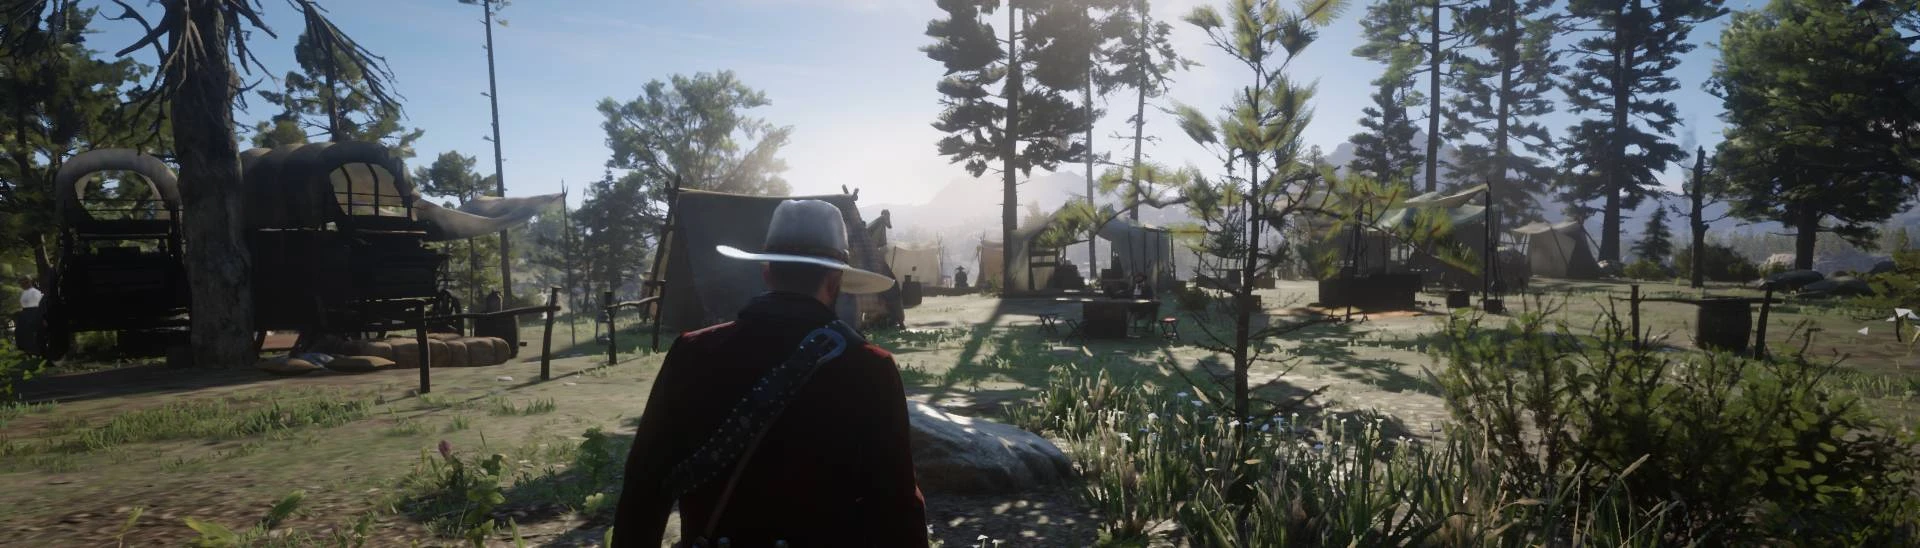 Alternate Ending at Red Dead Redemption 2 Nexus - Mods and community